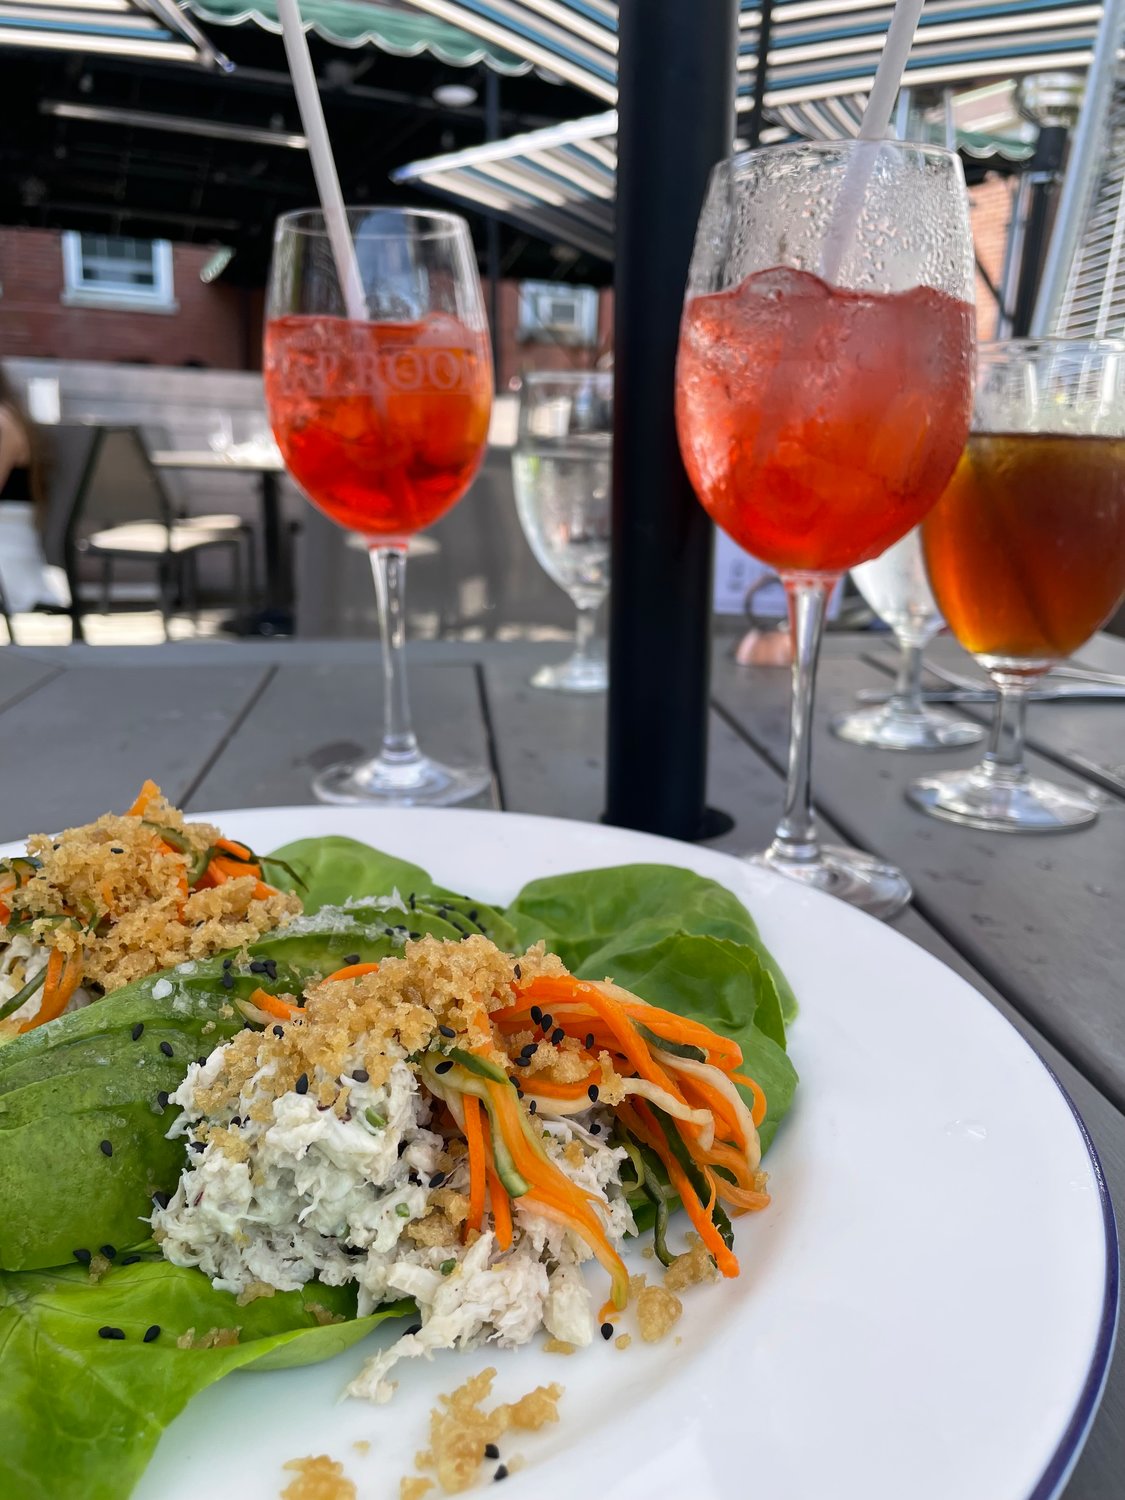 The crab salad features jumbo lump crab tossed with wasabi-ponzu aioli, and shredded carrots, cucumber, avocado and a tempura crunch.